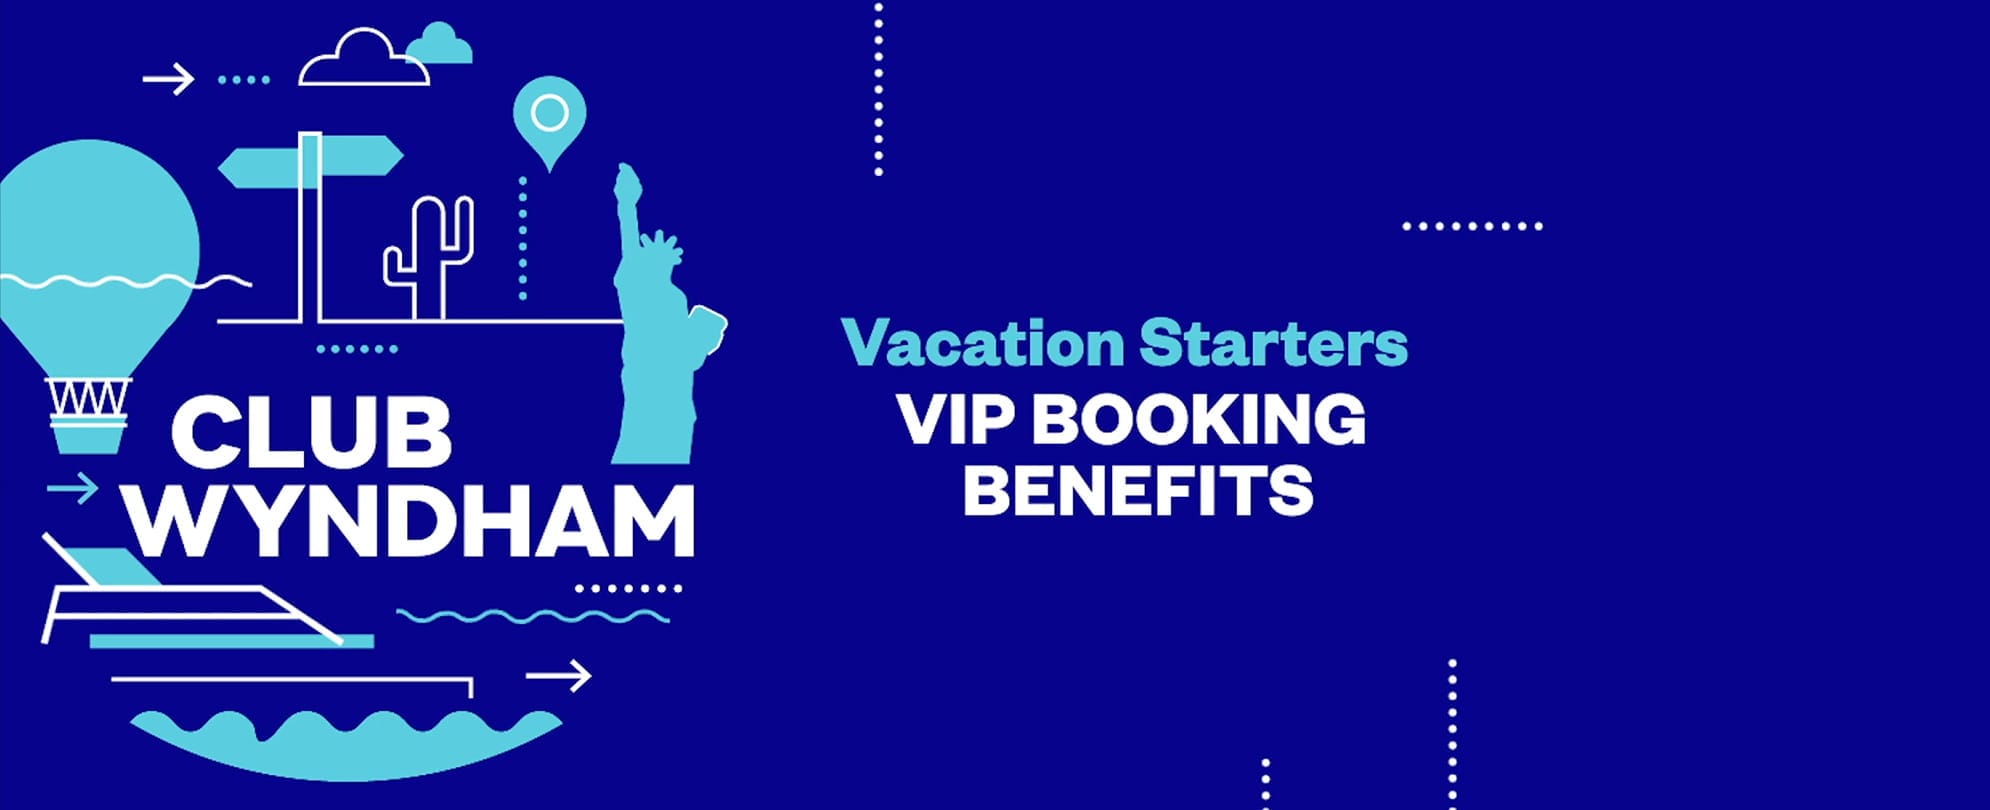 VIP Booking Benefits overview from the Club Wyndham Vacation Starters video series